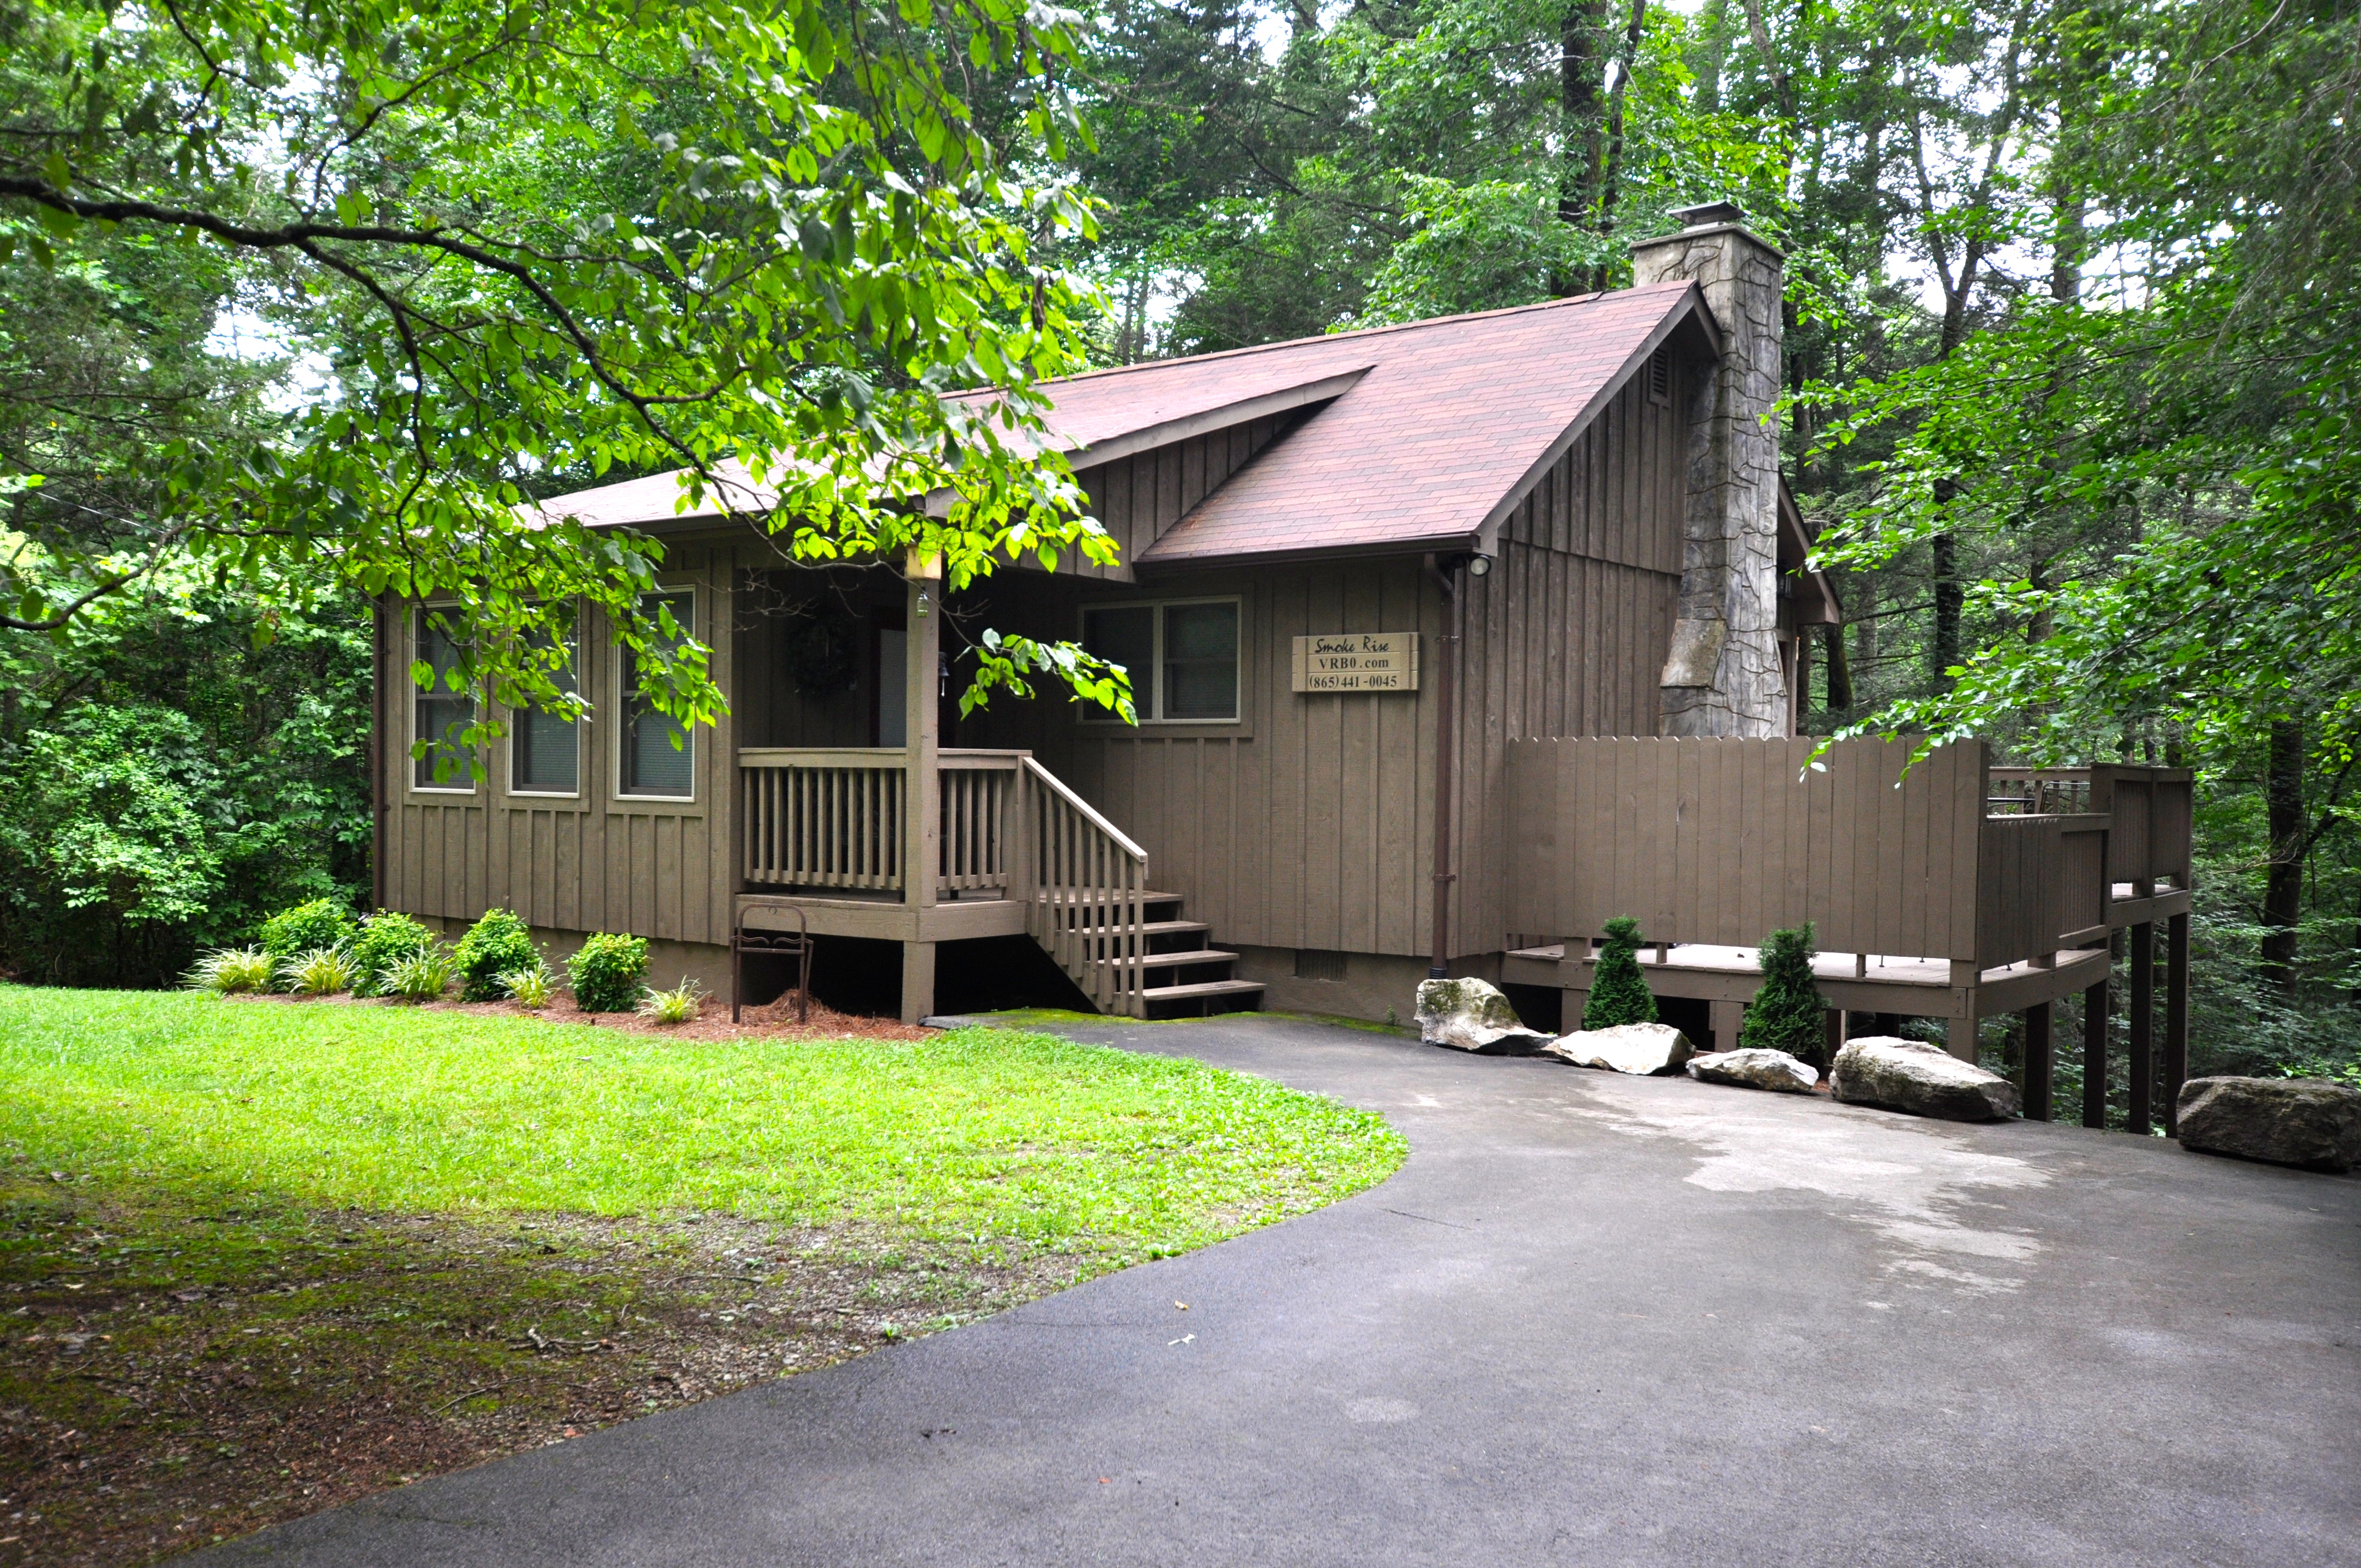 Cades Cove Cabins, in Townsend TN, Vacation Rental Cabins near Cades ...